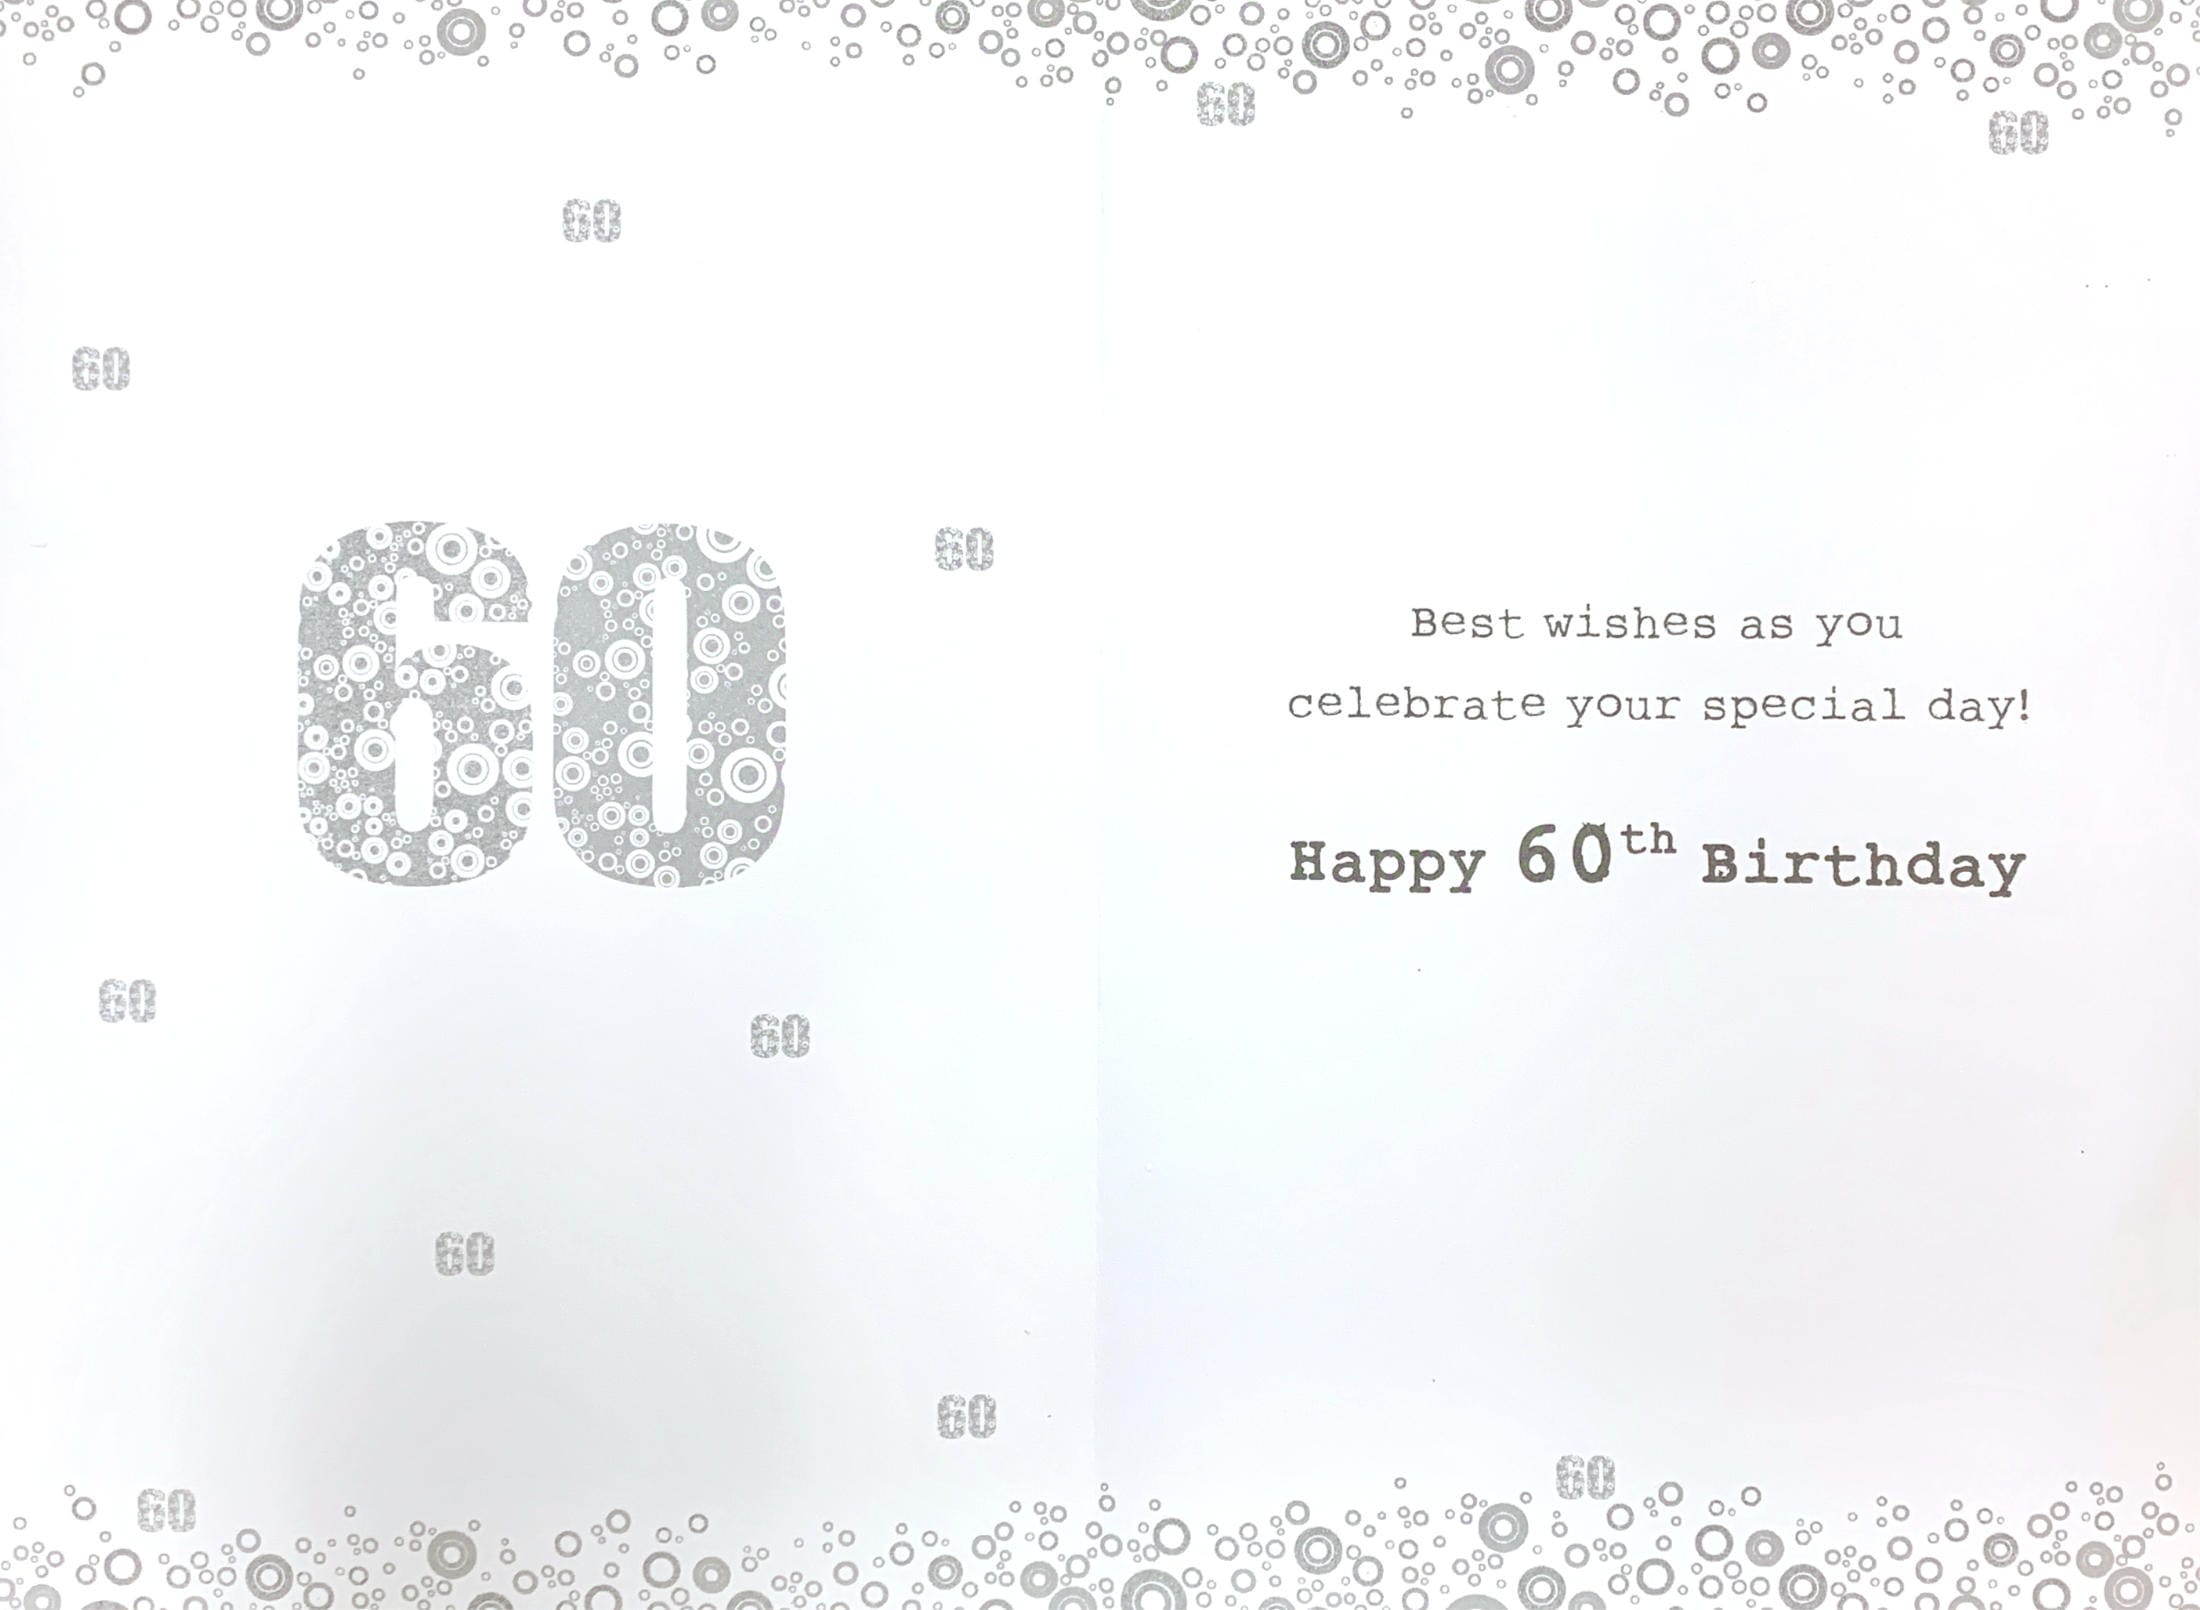 Inside of 60th Birthday Holographic Circles Card